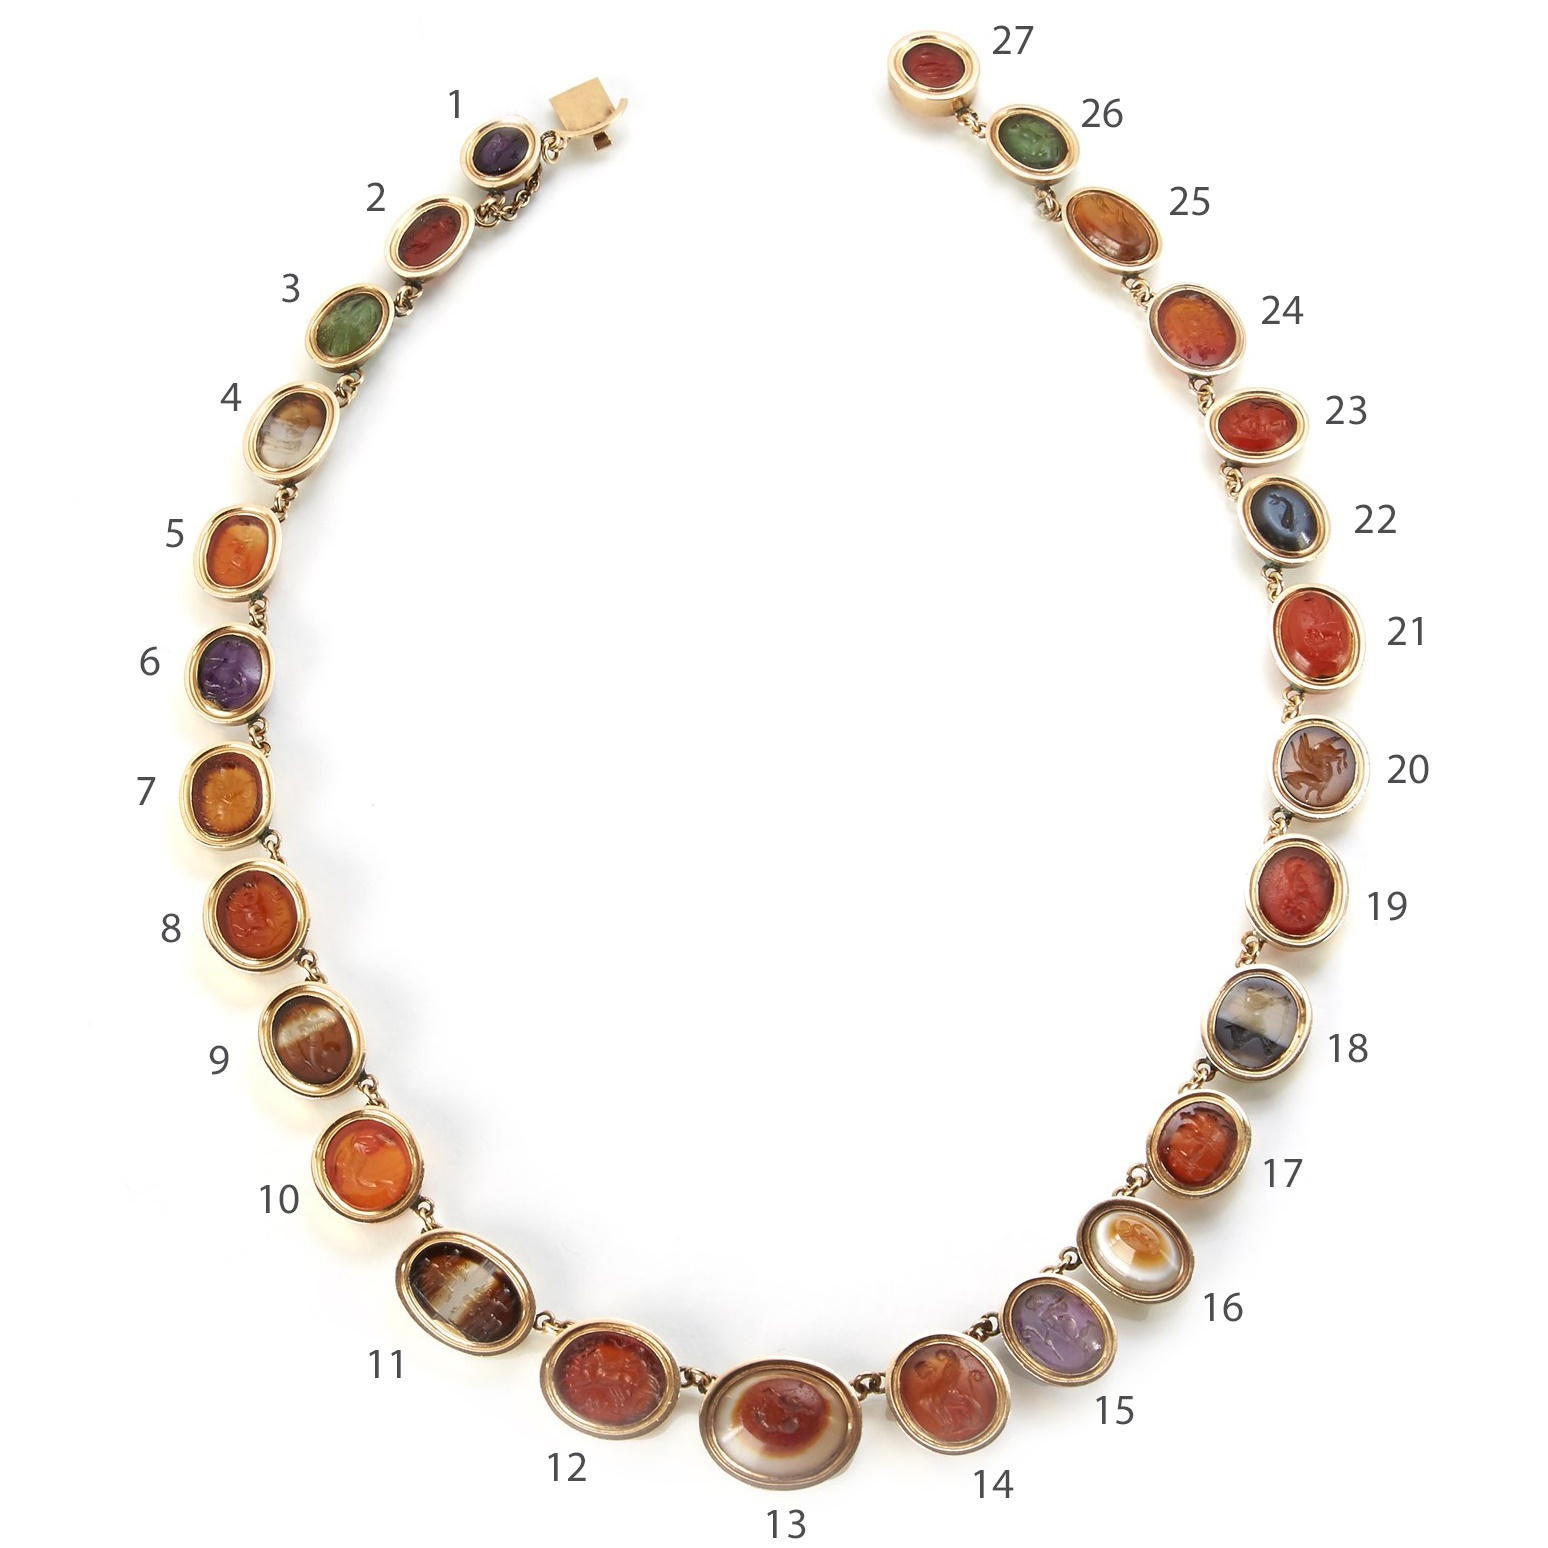 An important archaeological Roman intaglio set necklace. 27 Roman hardstone intaglios, mainly of the 1st century CE, 